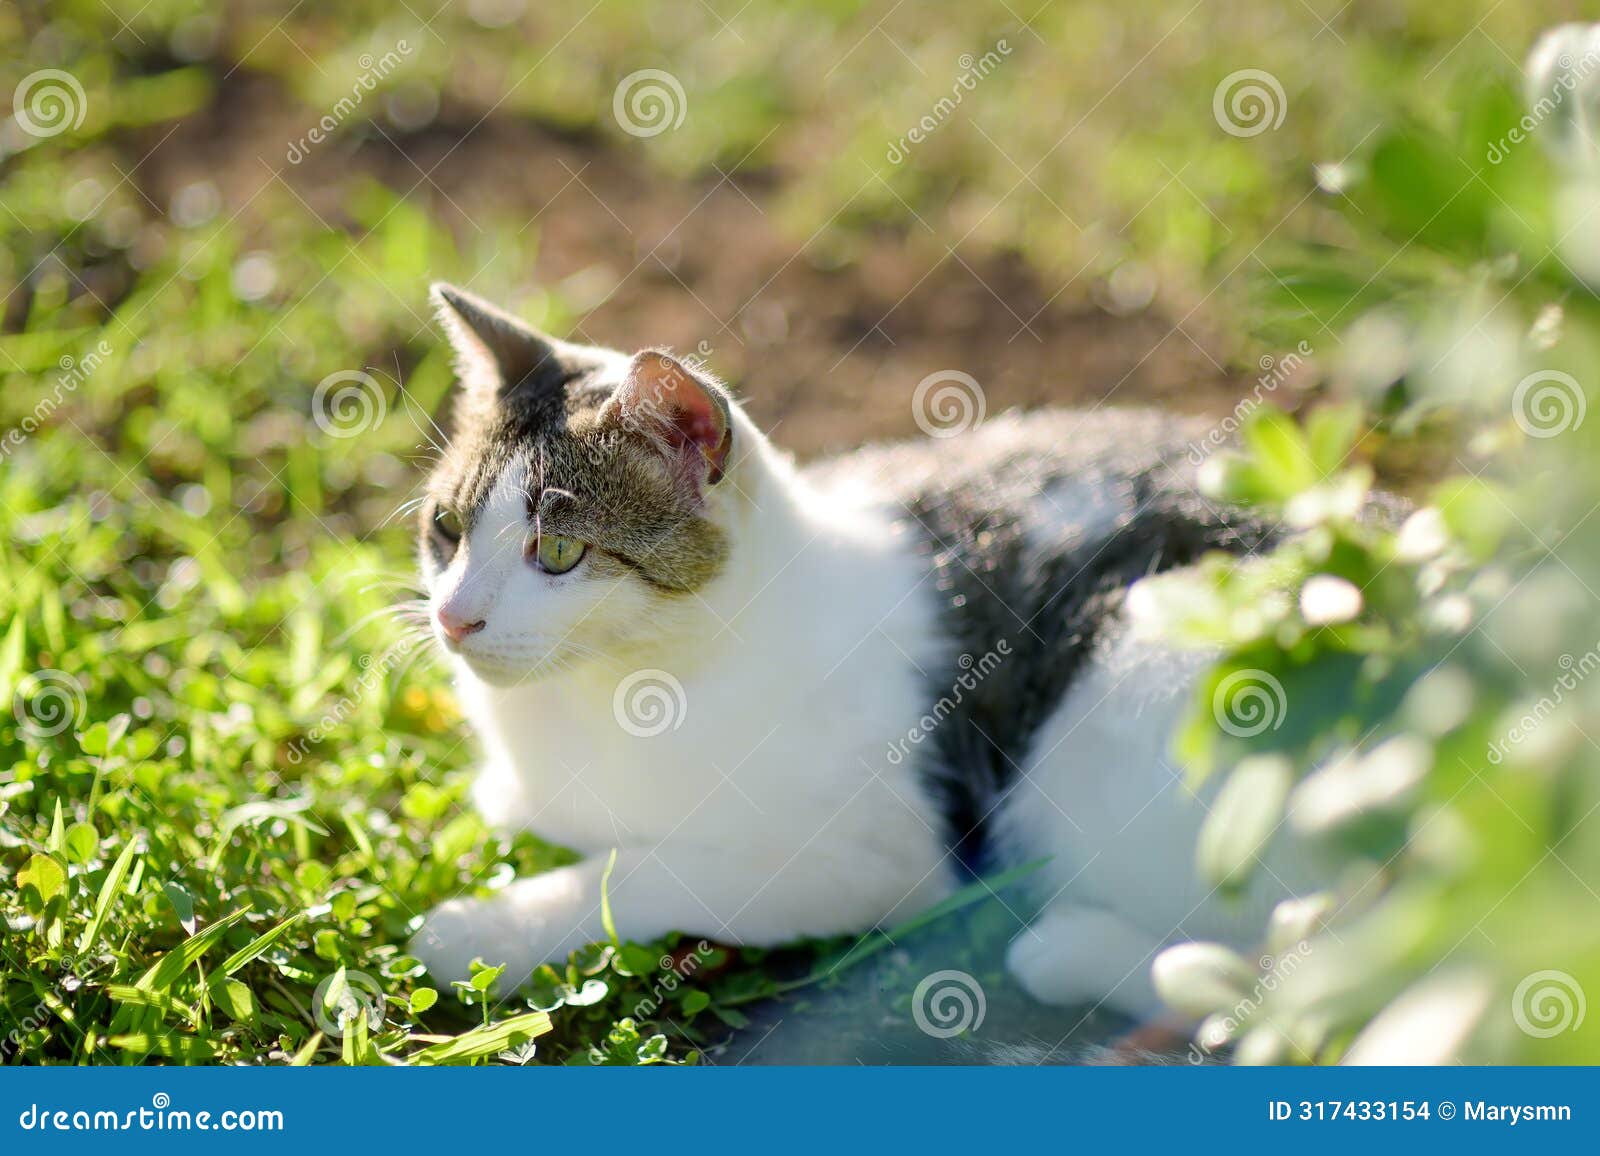 a young beauty cat is in the backyard of the house among the bright green grass on a bright sunny summer day. cute pussycat. lost